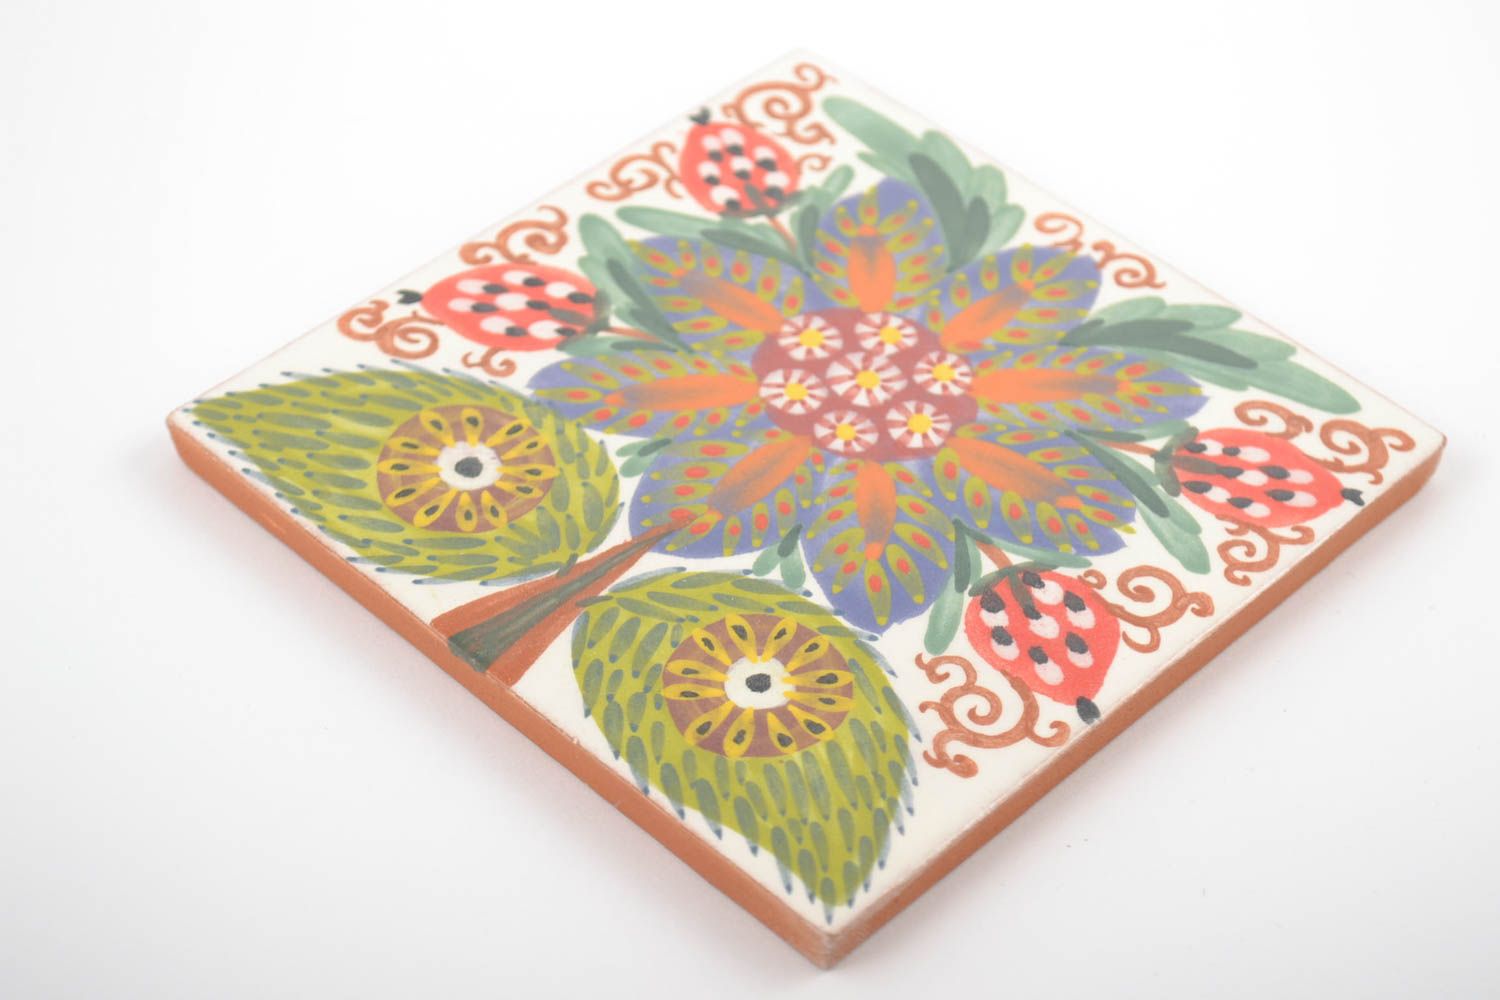 Handmade decorative ceramic tile painted with engobes with colorful flower image photo 4